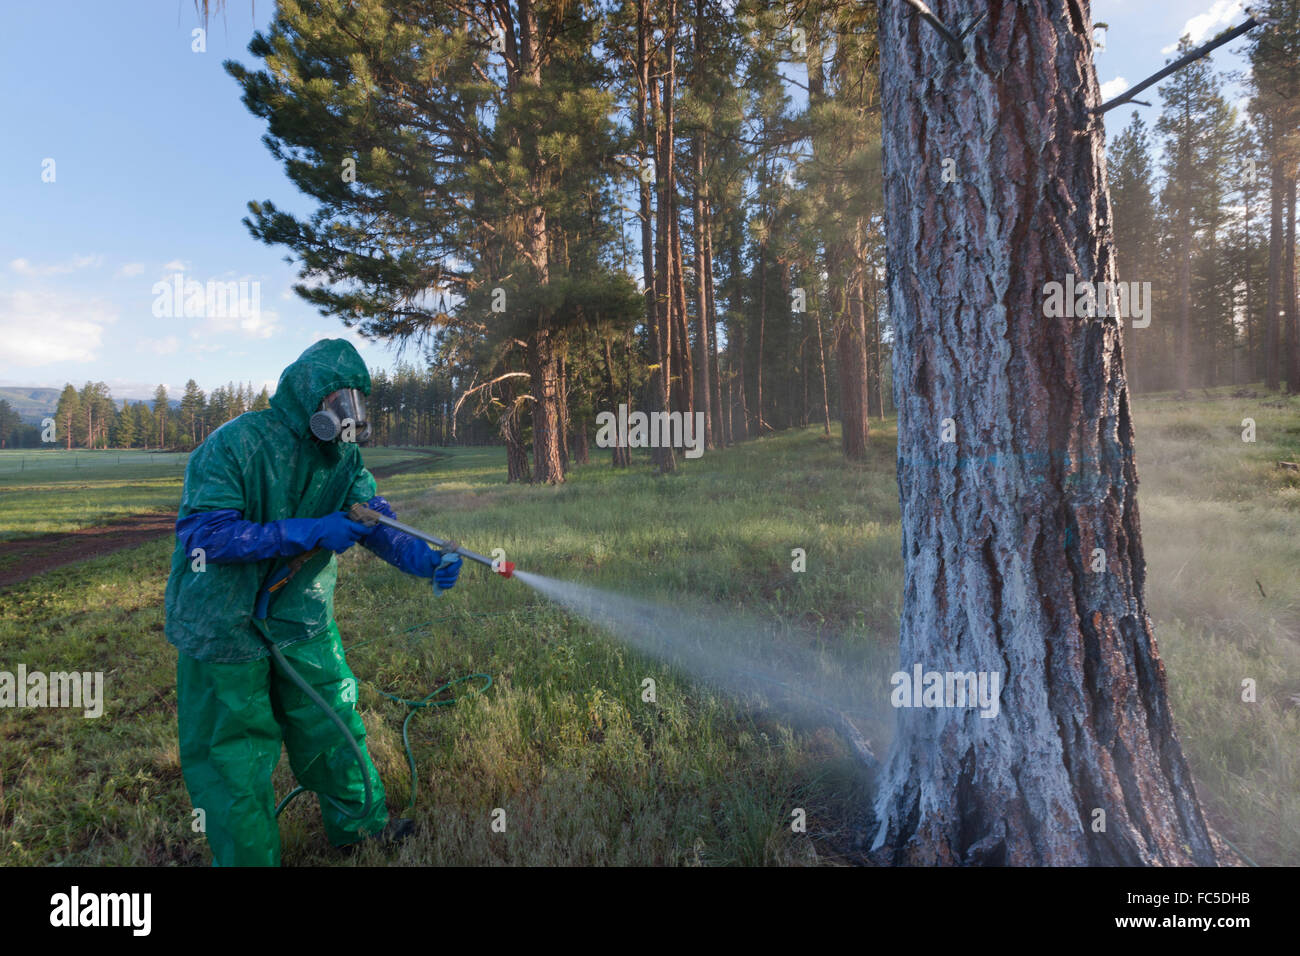 Spraying a carbamate insecticide on a ponderosa pine tree near Seeley Lake, Montana to protect against the mountain pine beetle. Stock Photo